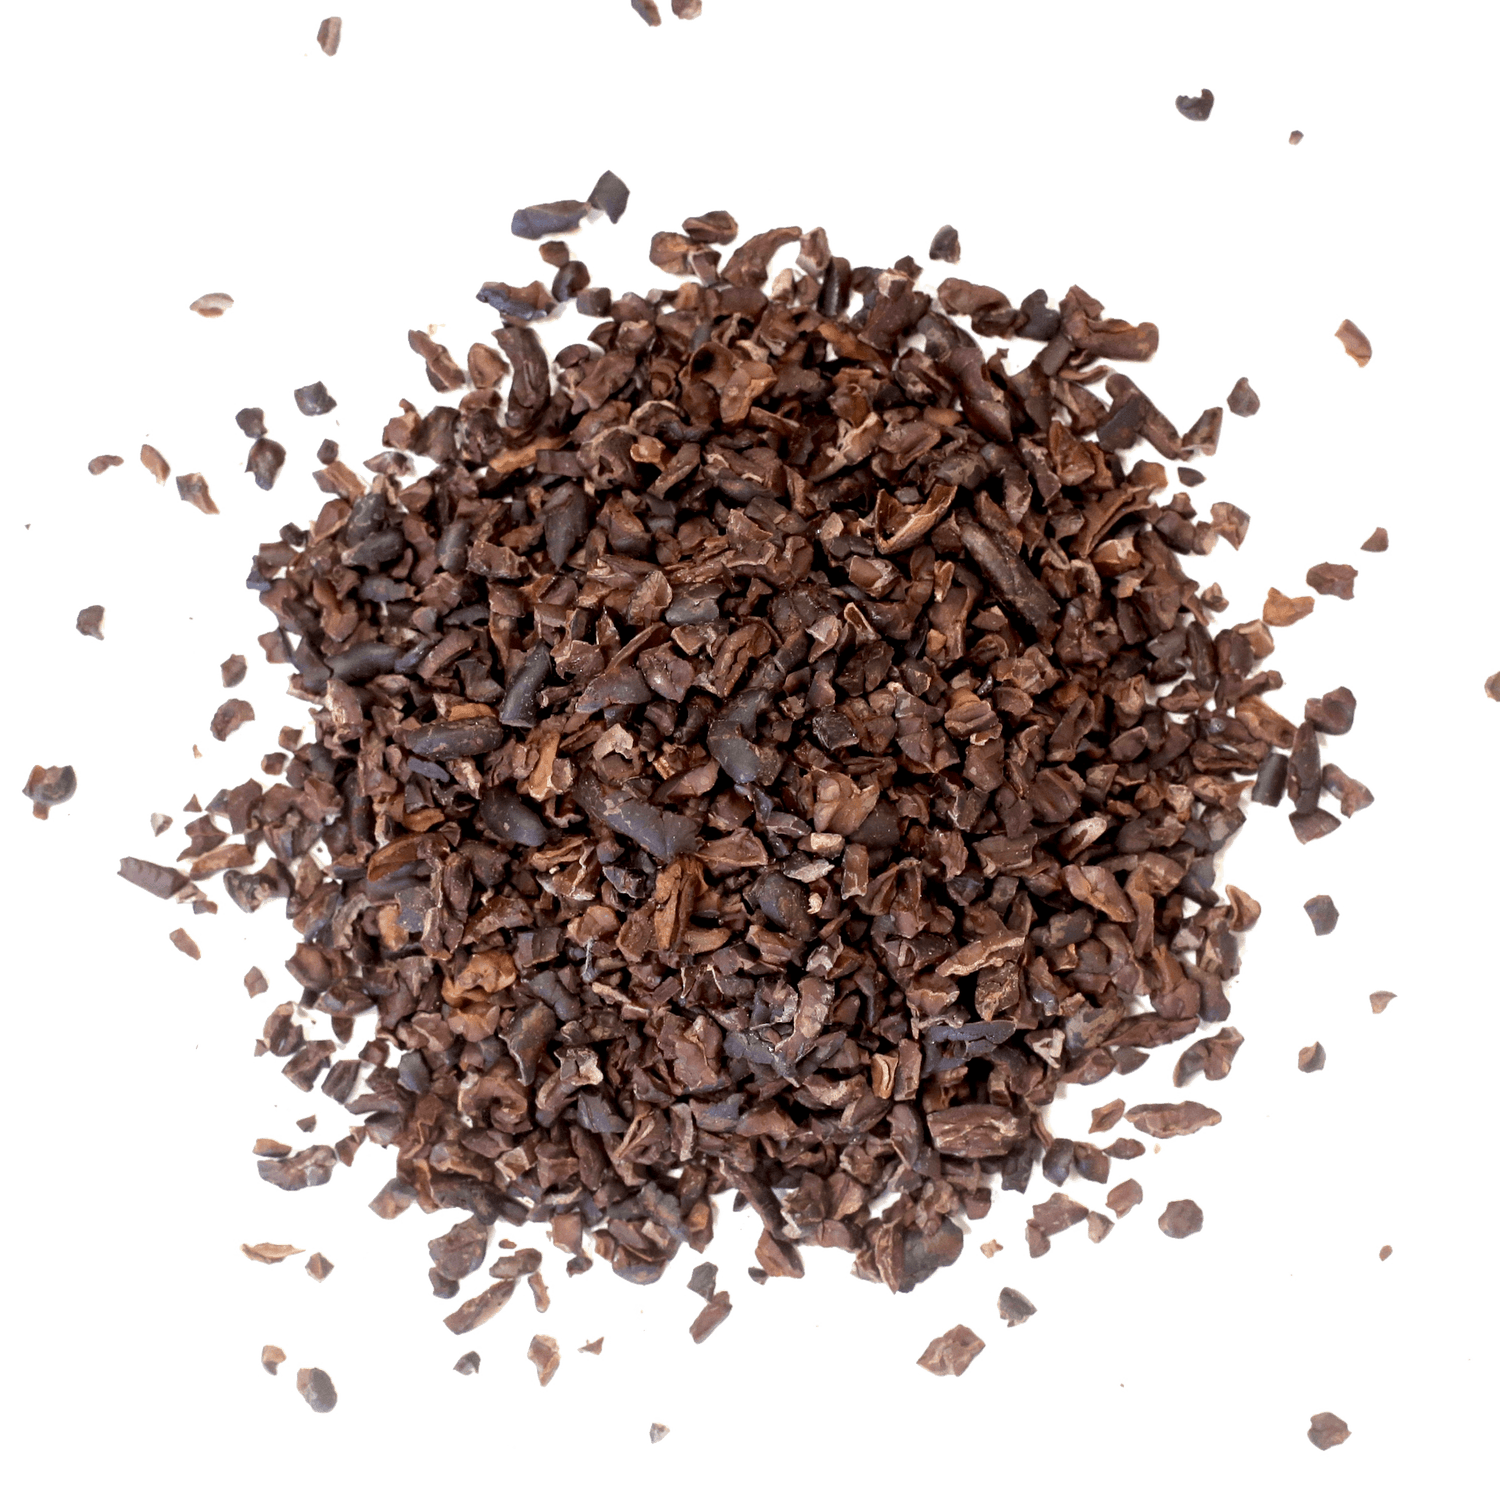 Image of a pile of cacao nibs